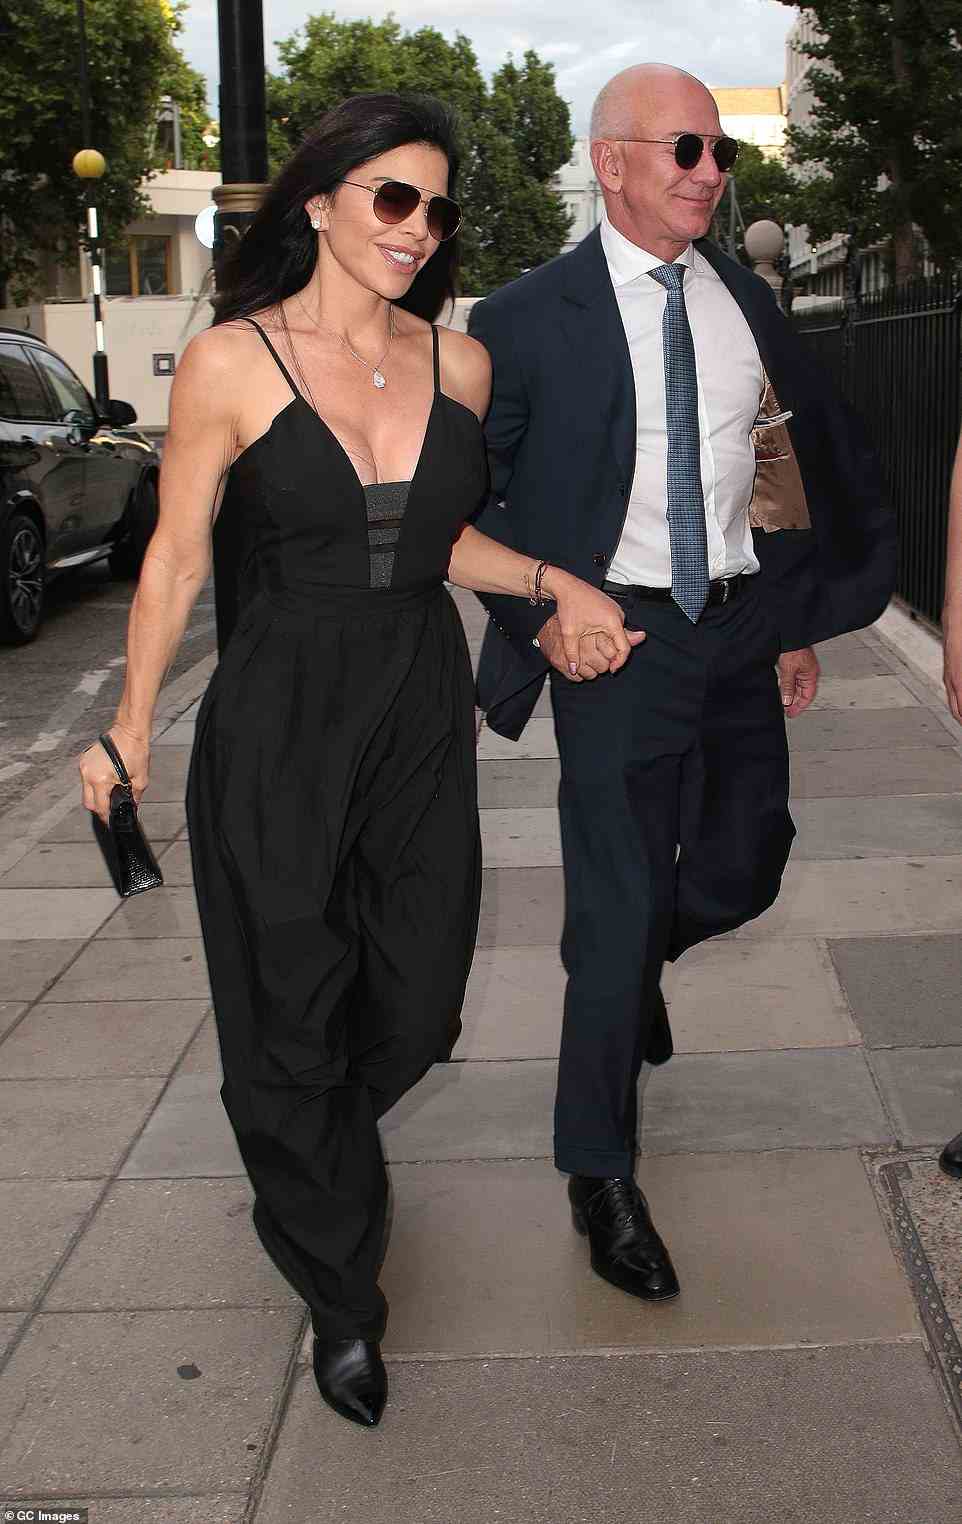 Jeff Bezos recently returned from a romantic getaway in London with his girlfriend, Lauren Sanchez, who turned the British city into her own personal runway during the trip, sporting a series of lavish ensembles